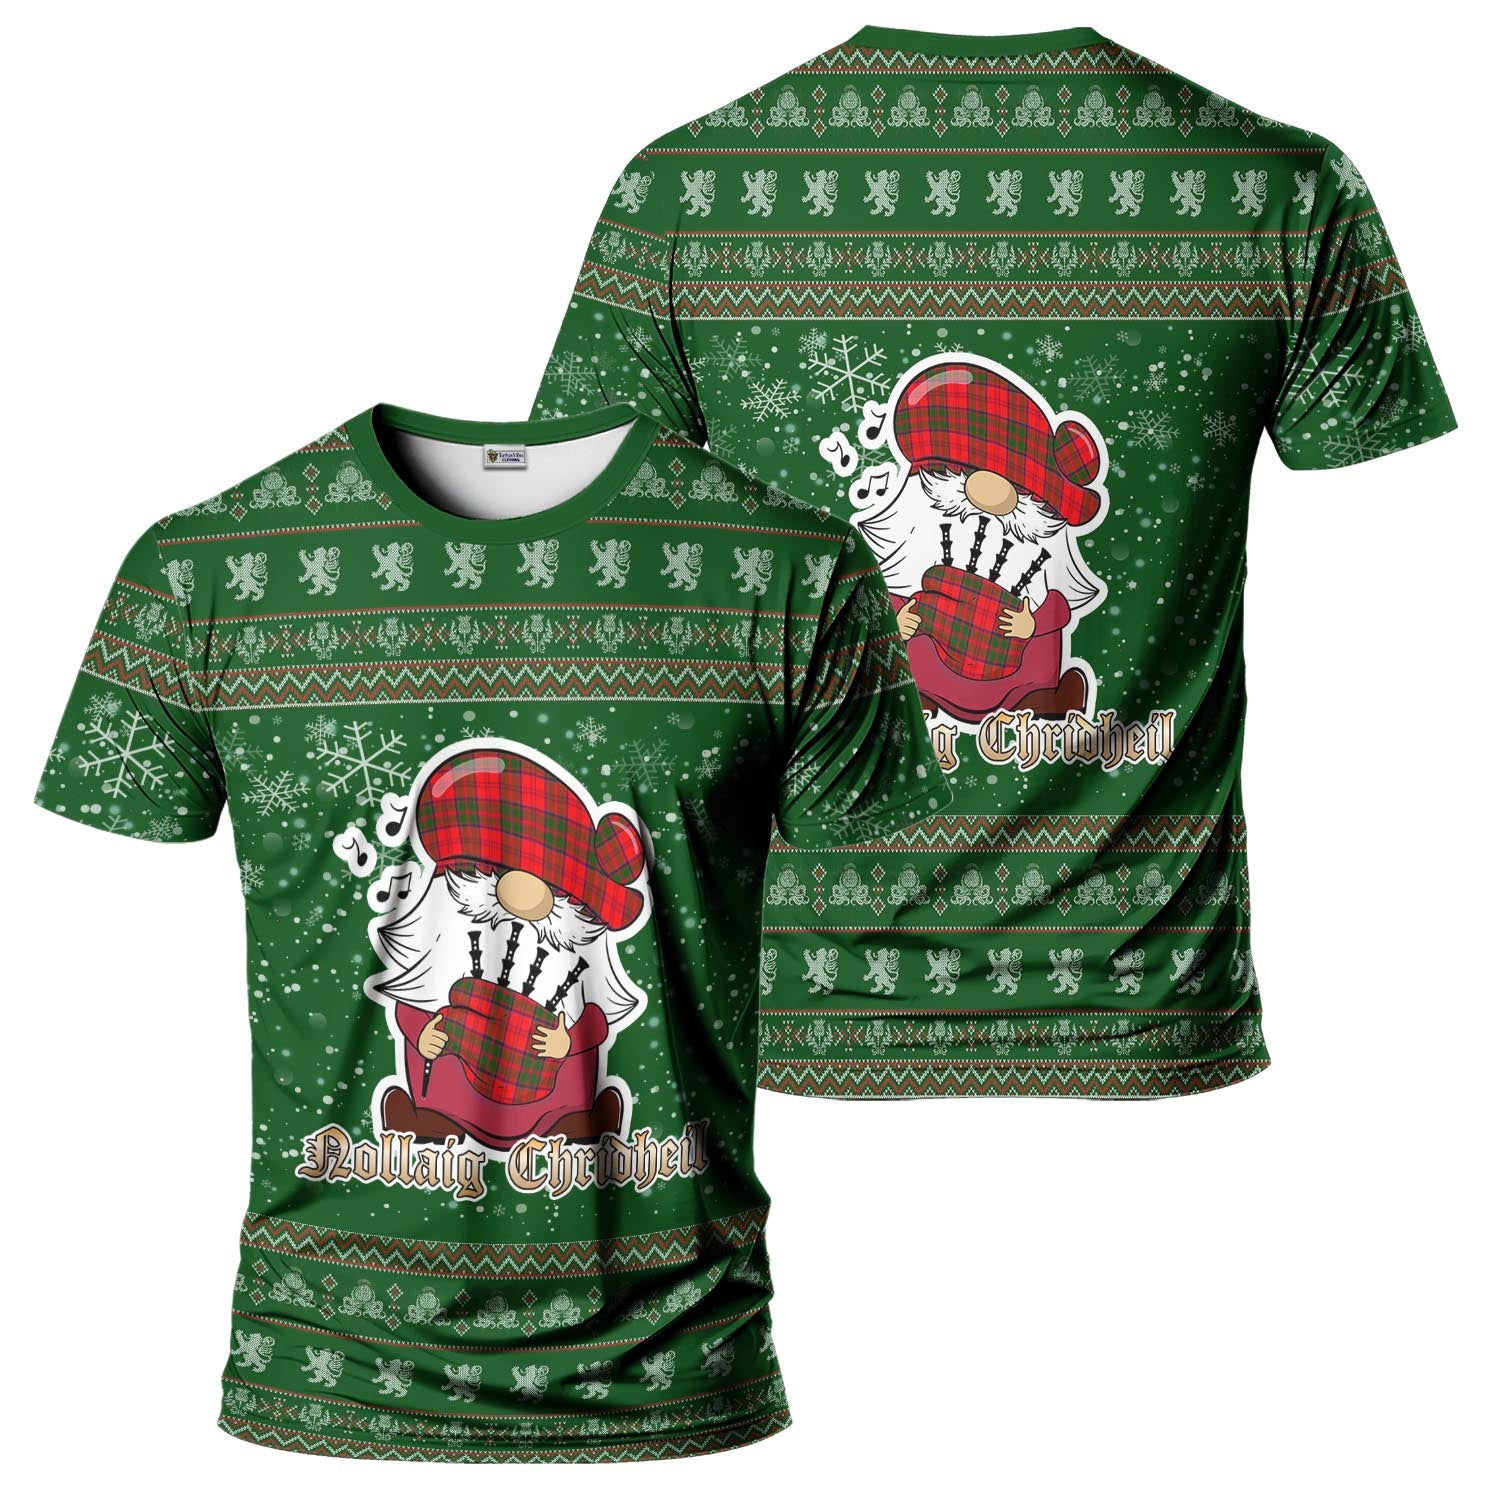 Heron Clan Christmas Family T-Shirt with Funny Gnome Playing Bagpipes Men's Shirt Green - Tartanvibesclothing